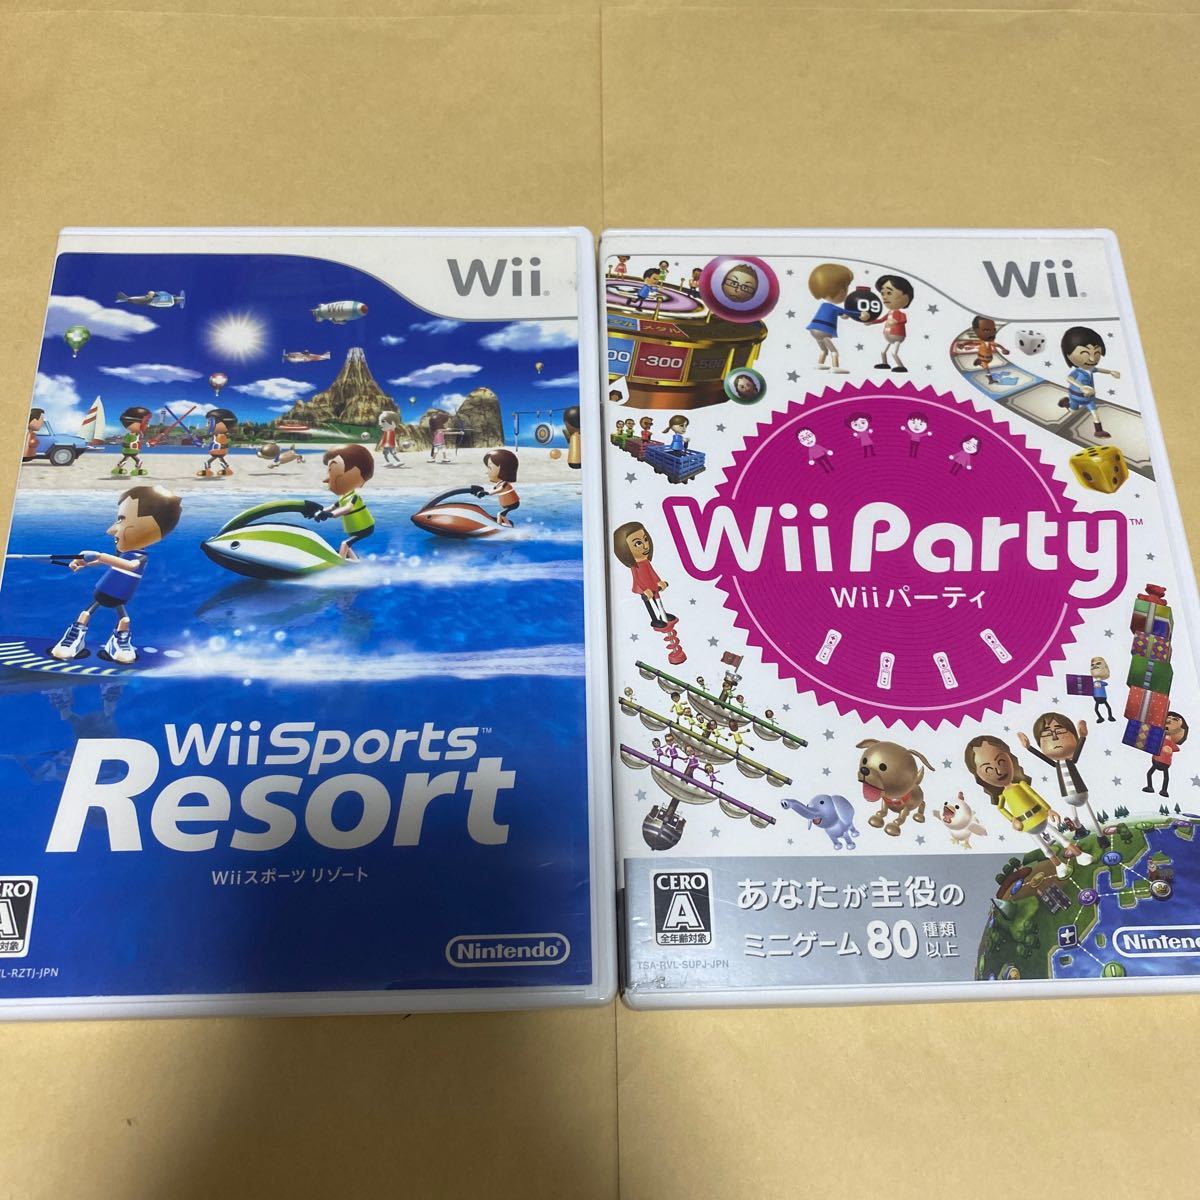 Wiiパーティと Wiiスポーツリゾート